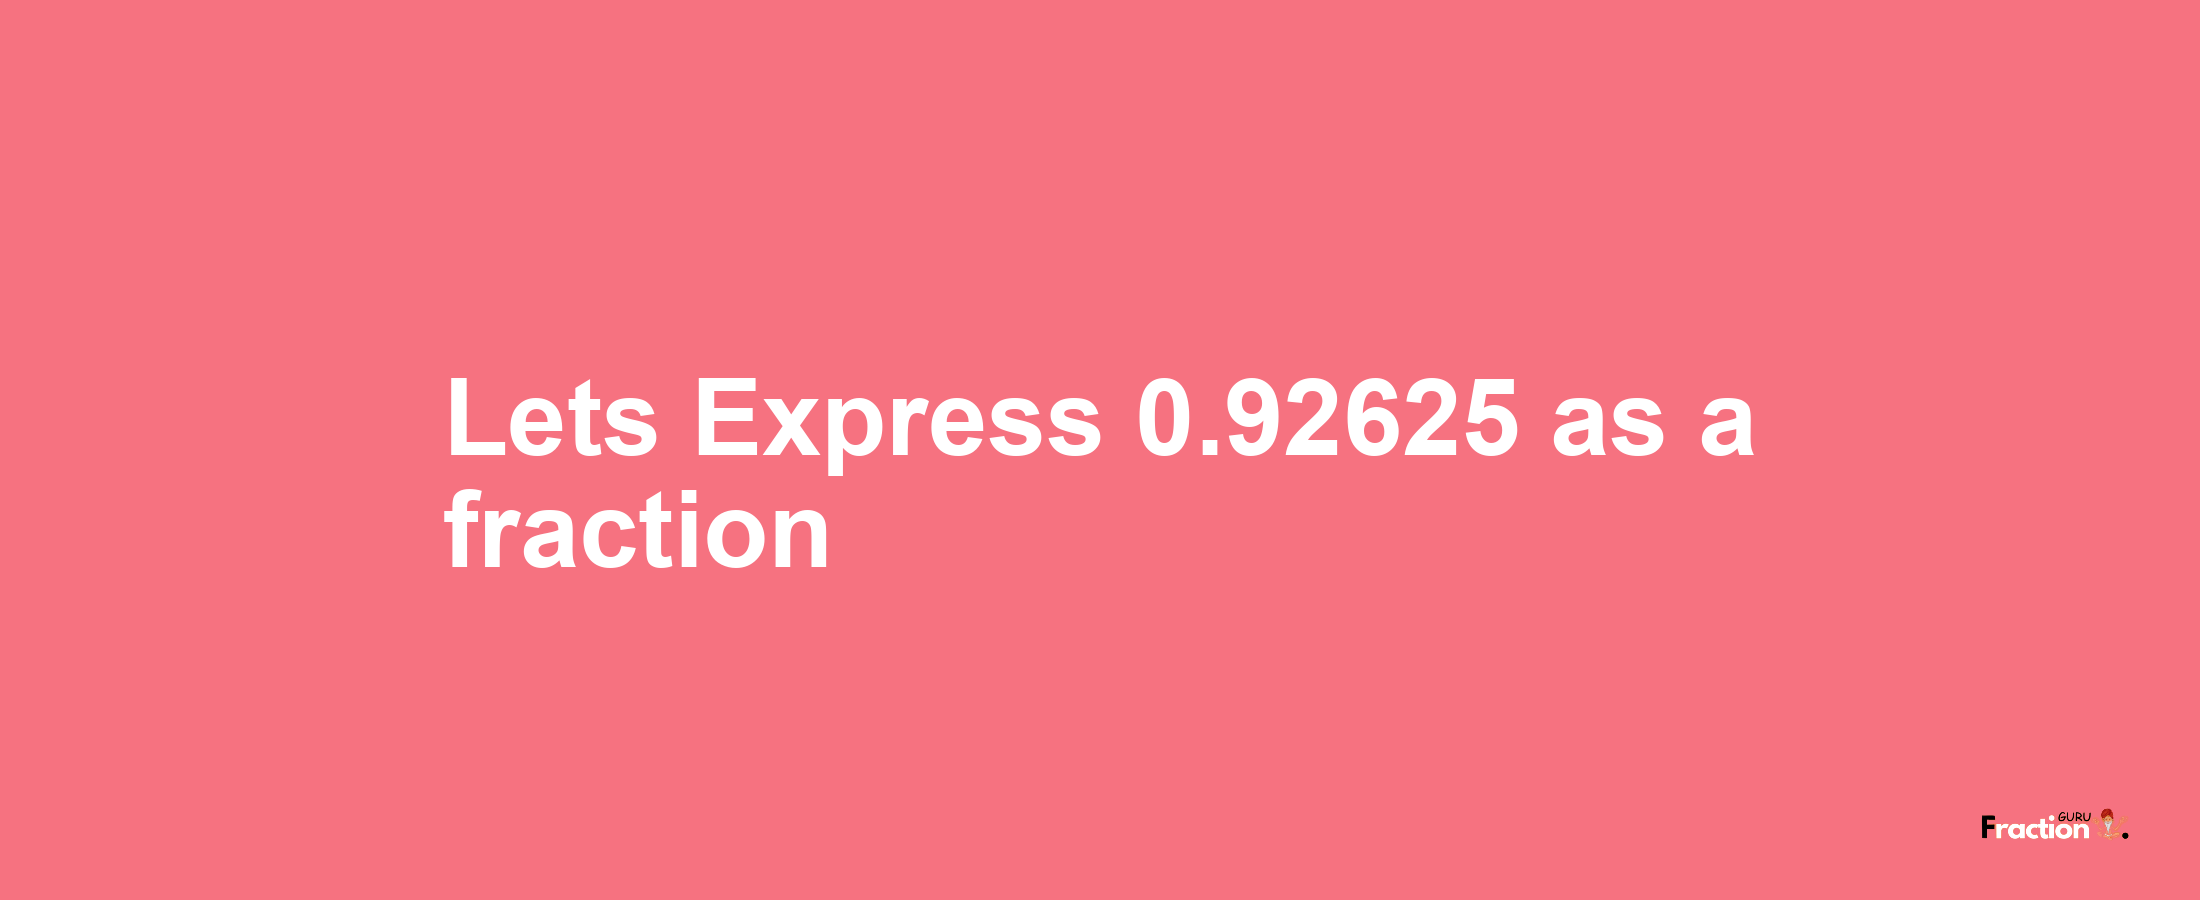 Lets Express 0.92625 as afraction